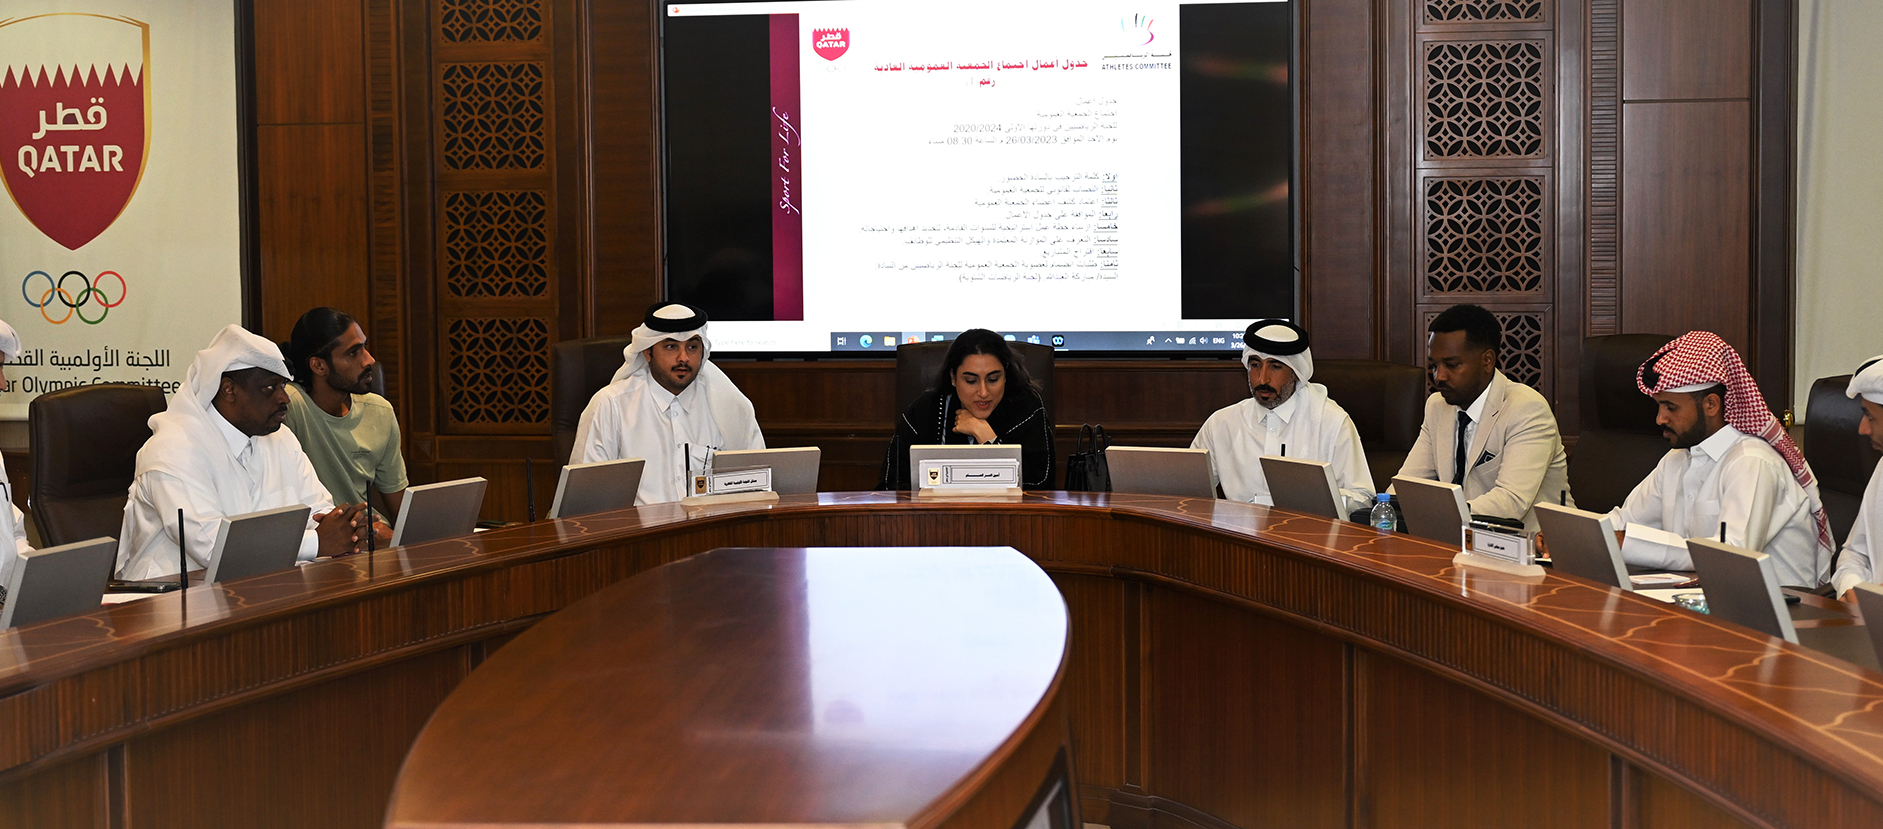 QOC Athletes Commission holds General Assembly Meeting